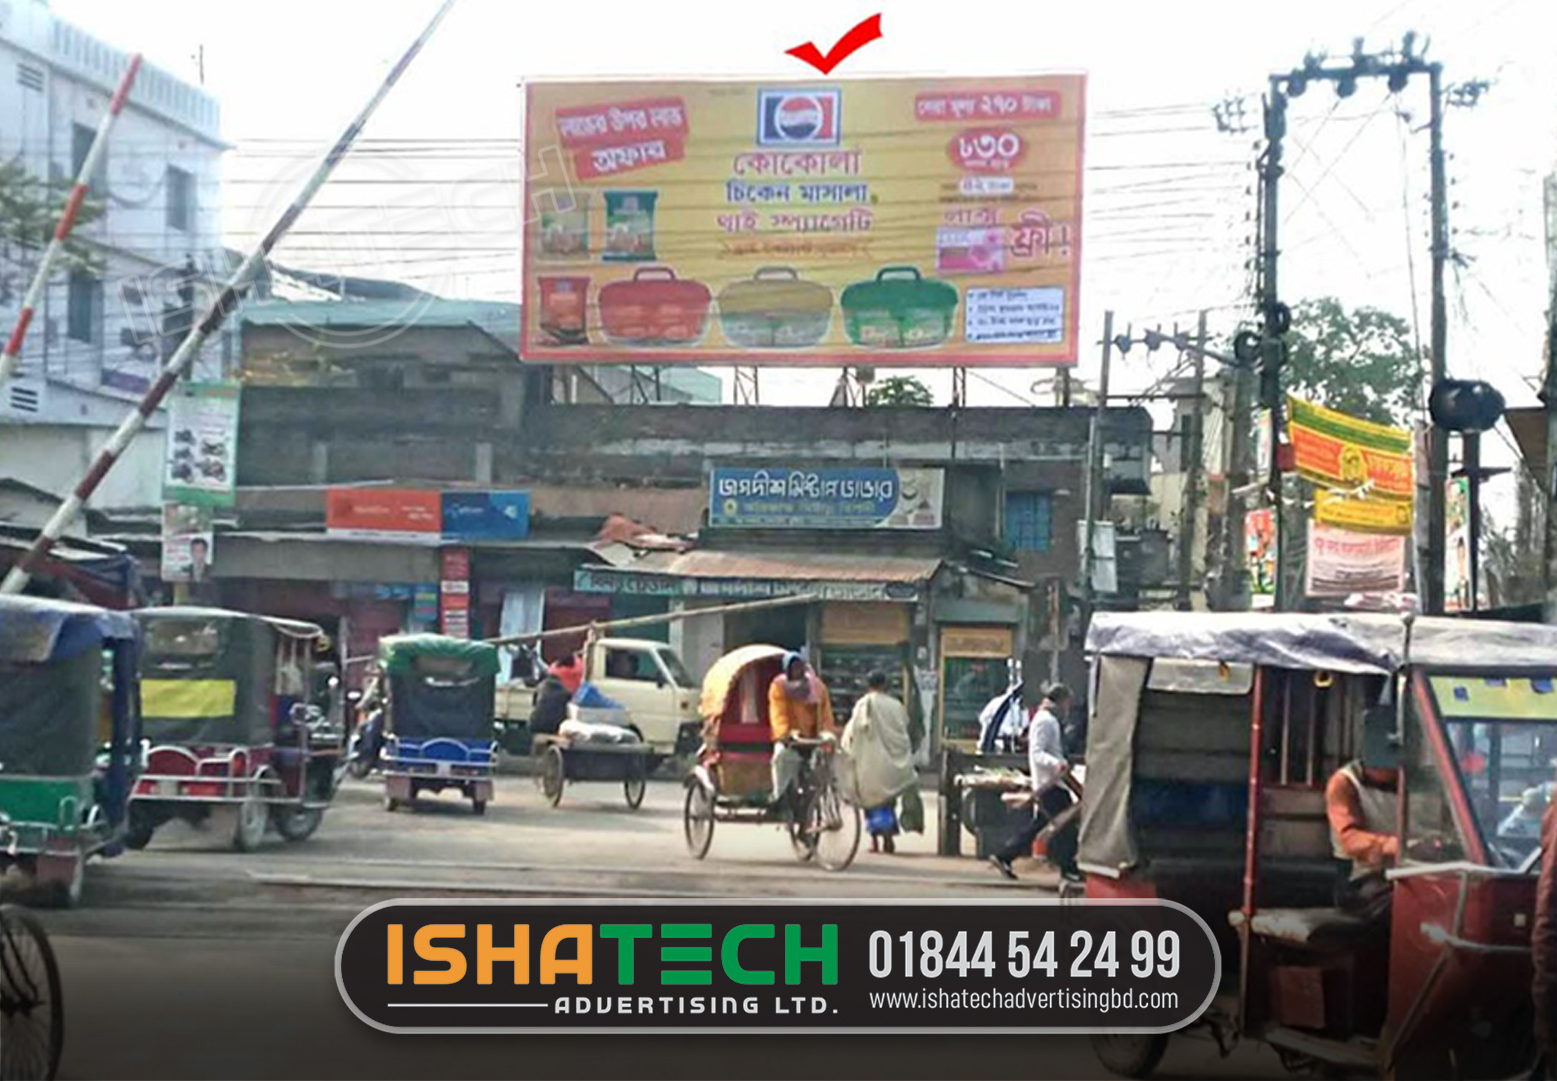 MARKET ROOFTOP PRODUCT ADVERTISING BILLBOARD RENTAL AND MAKER SERVICE IN BD